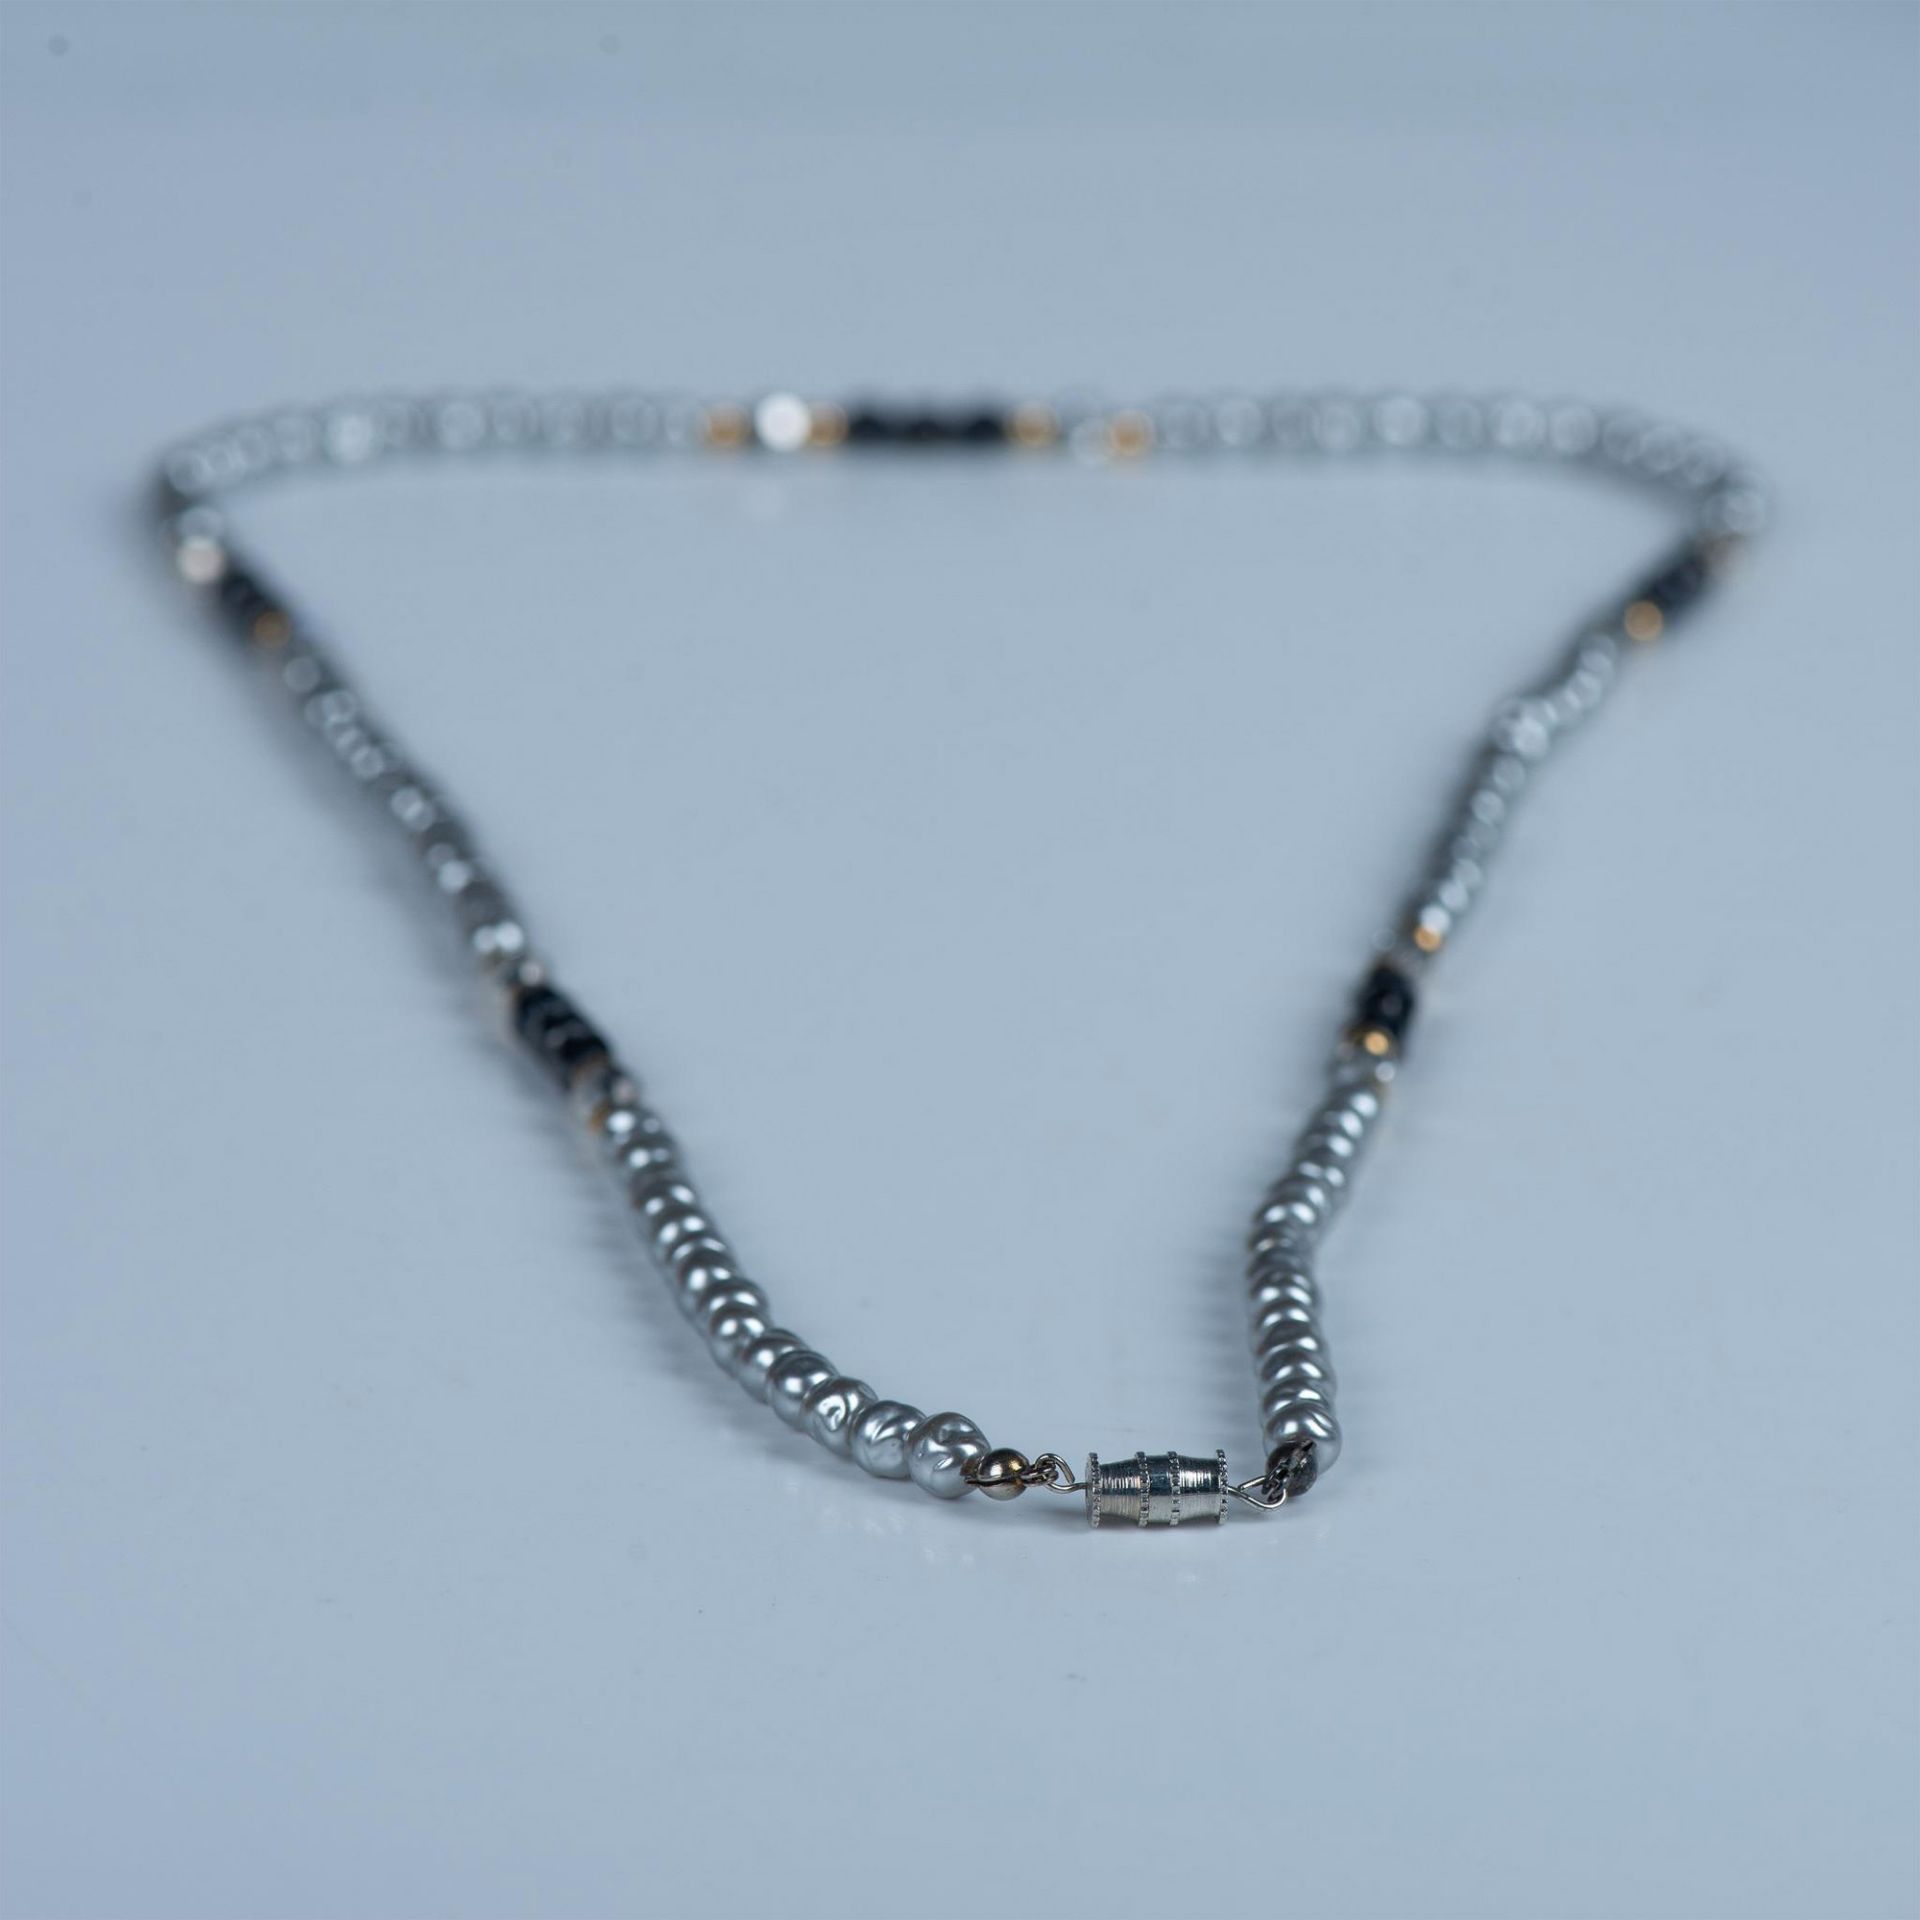 Classy Faux Pearl Strand Necklace - Image 6 of 8